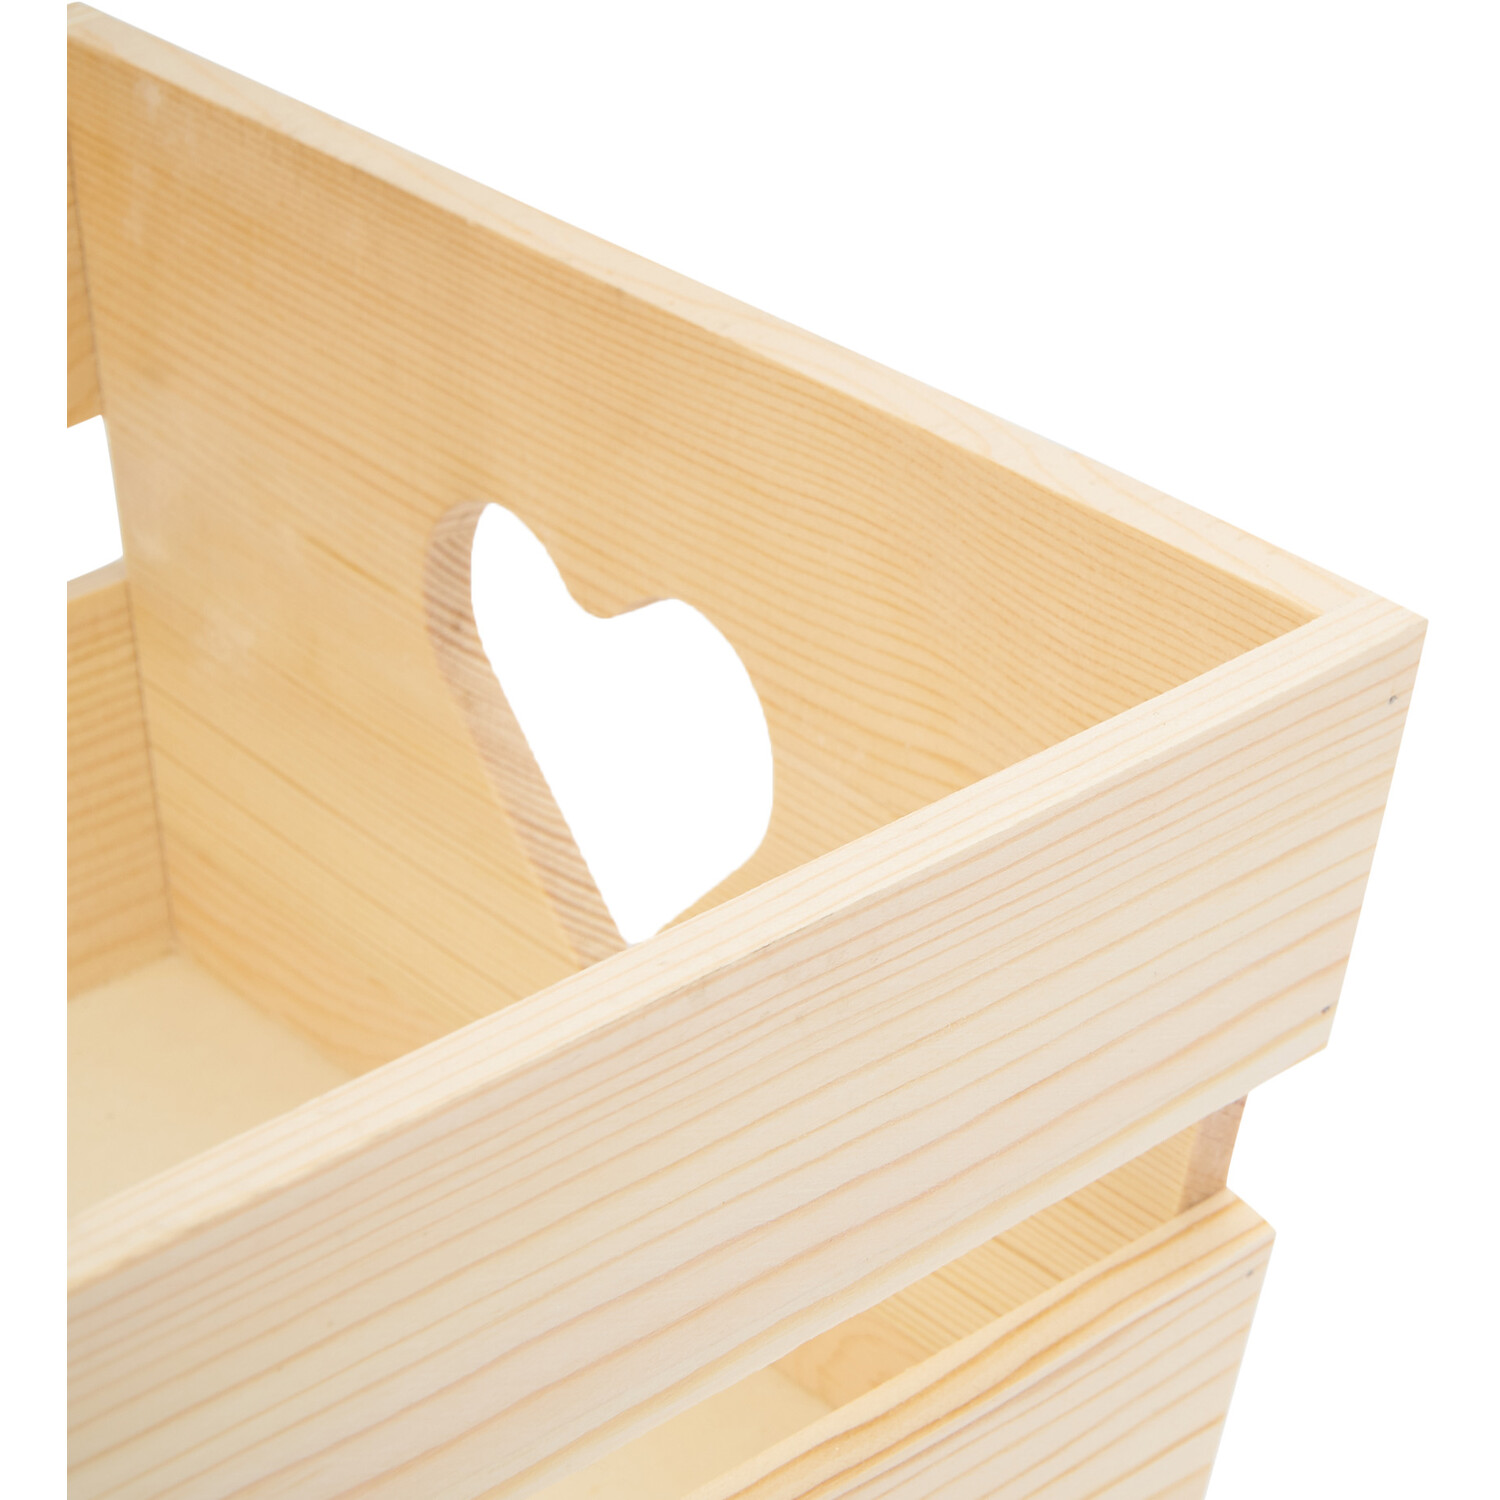 Wooden Craft Crate Image 2